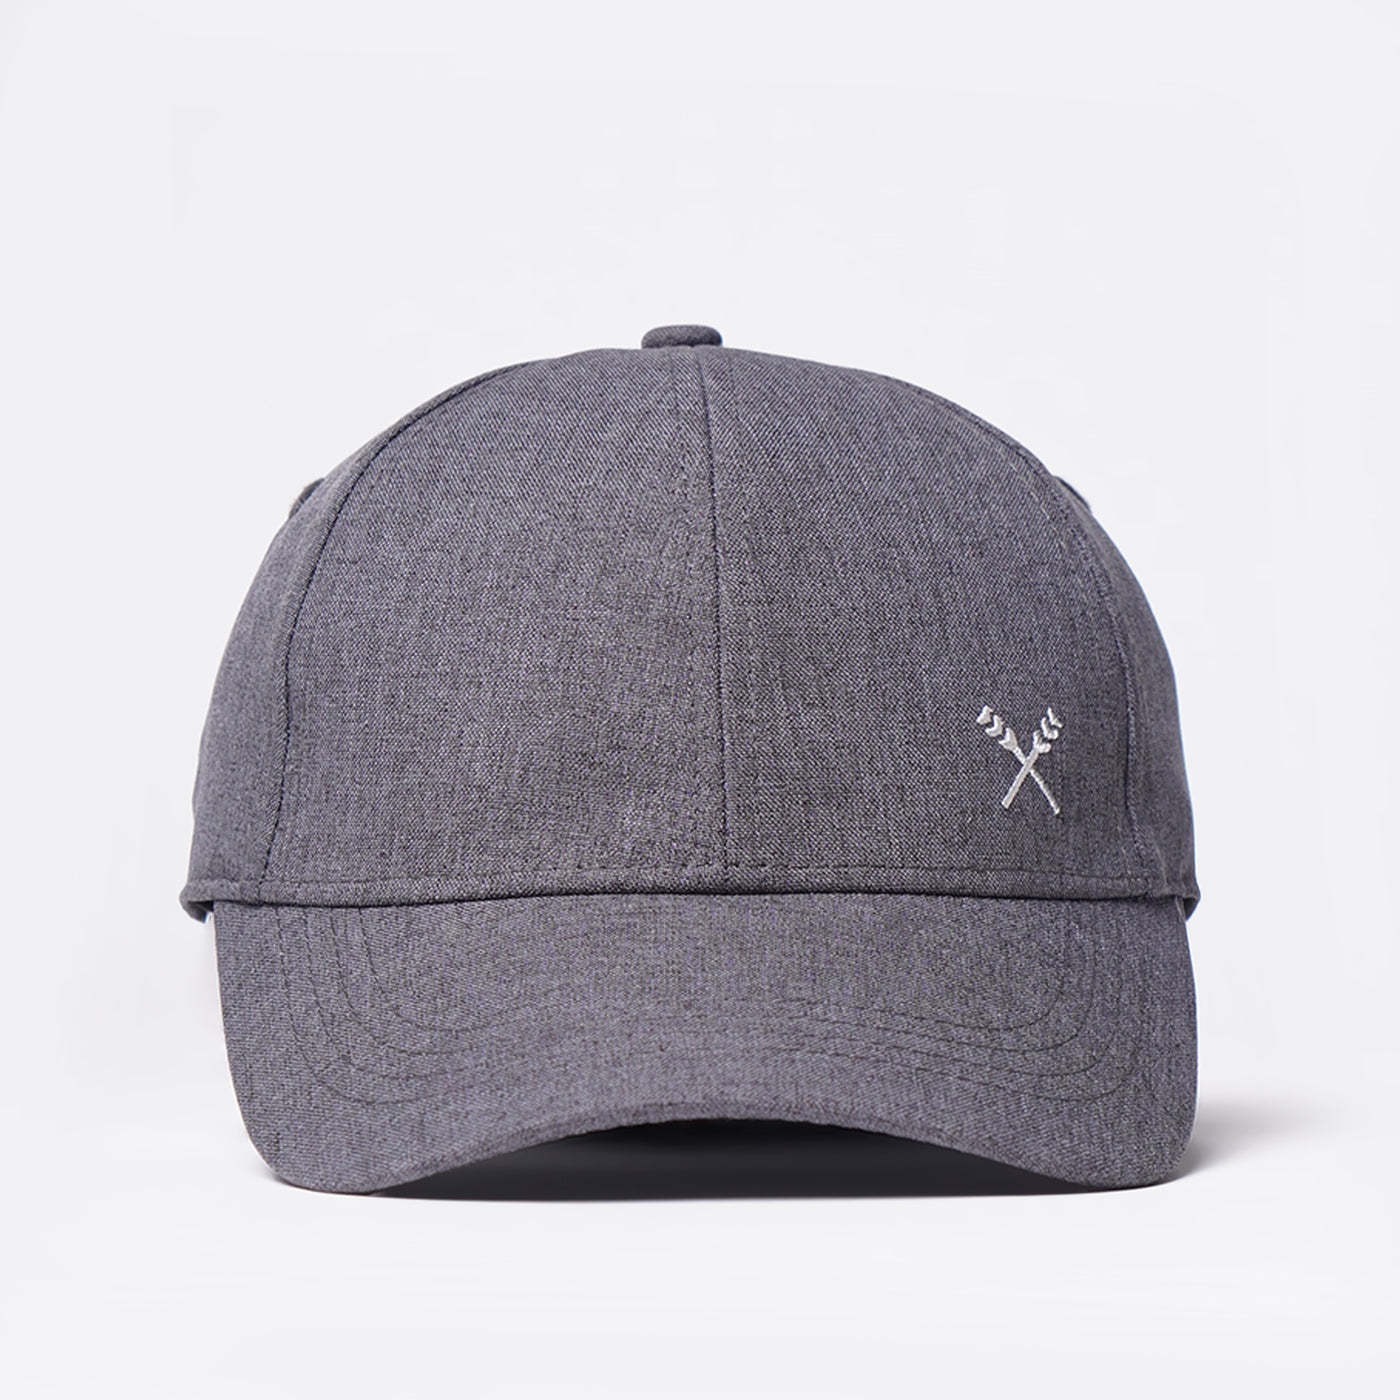 Baseball Cap With Contrast Adjuster